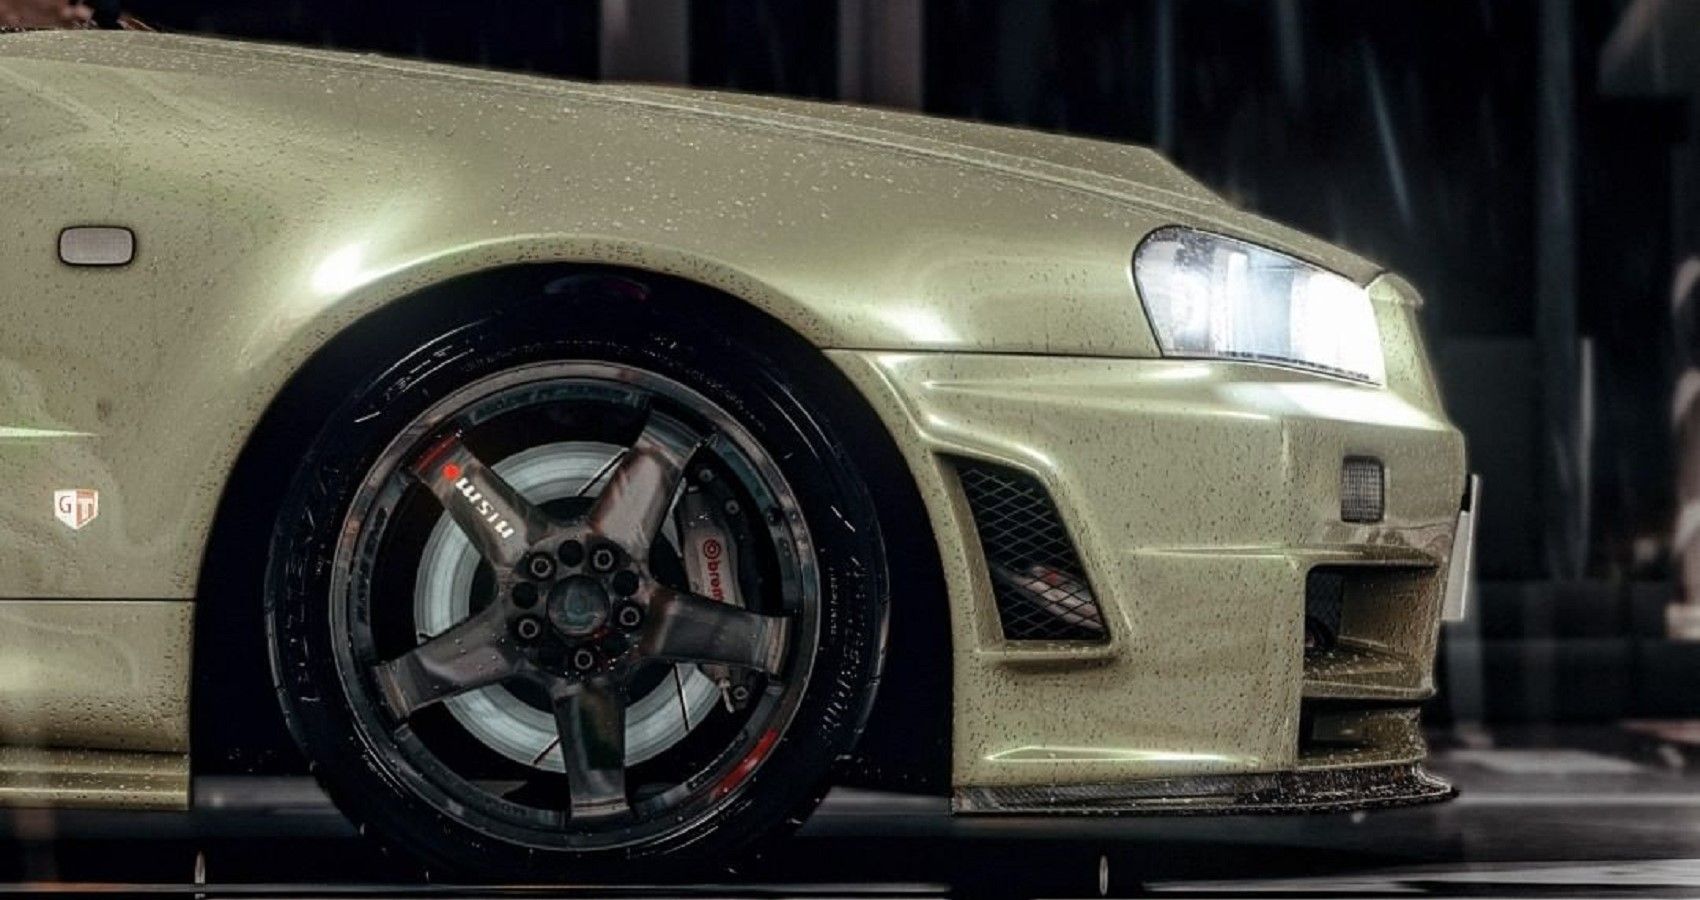 Nissan Skyline GT-R R34 Z-Tune, closeup of front section, side profile, gold